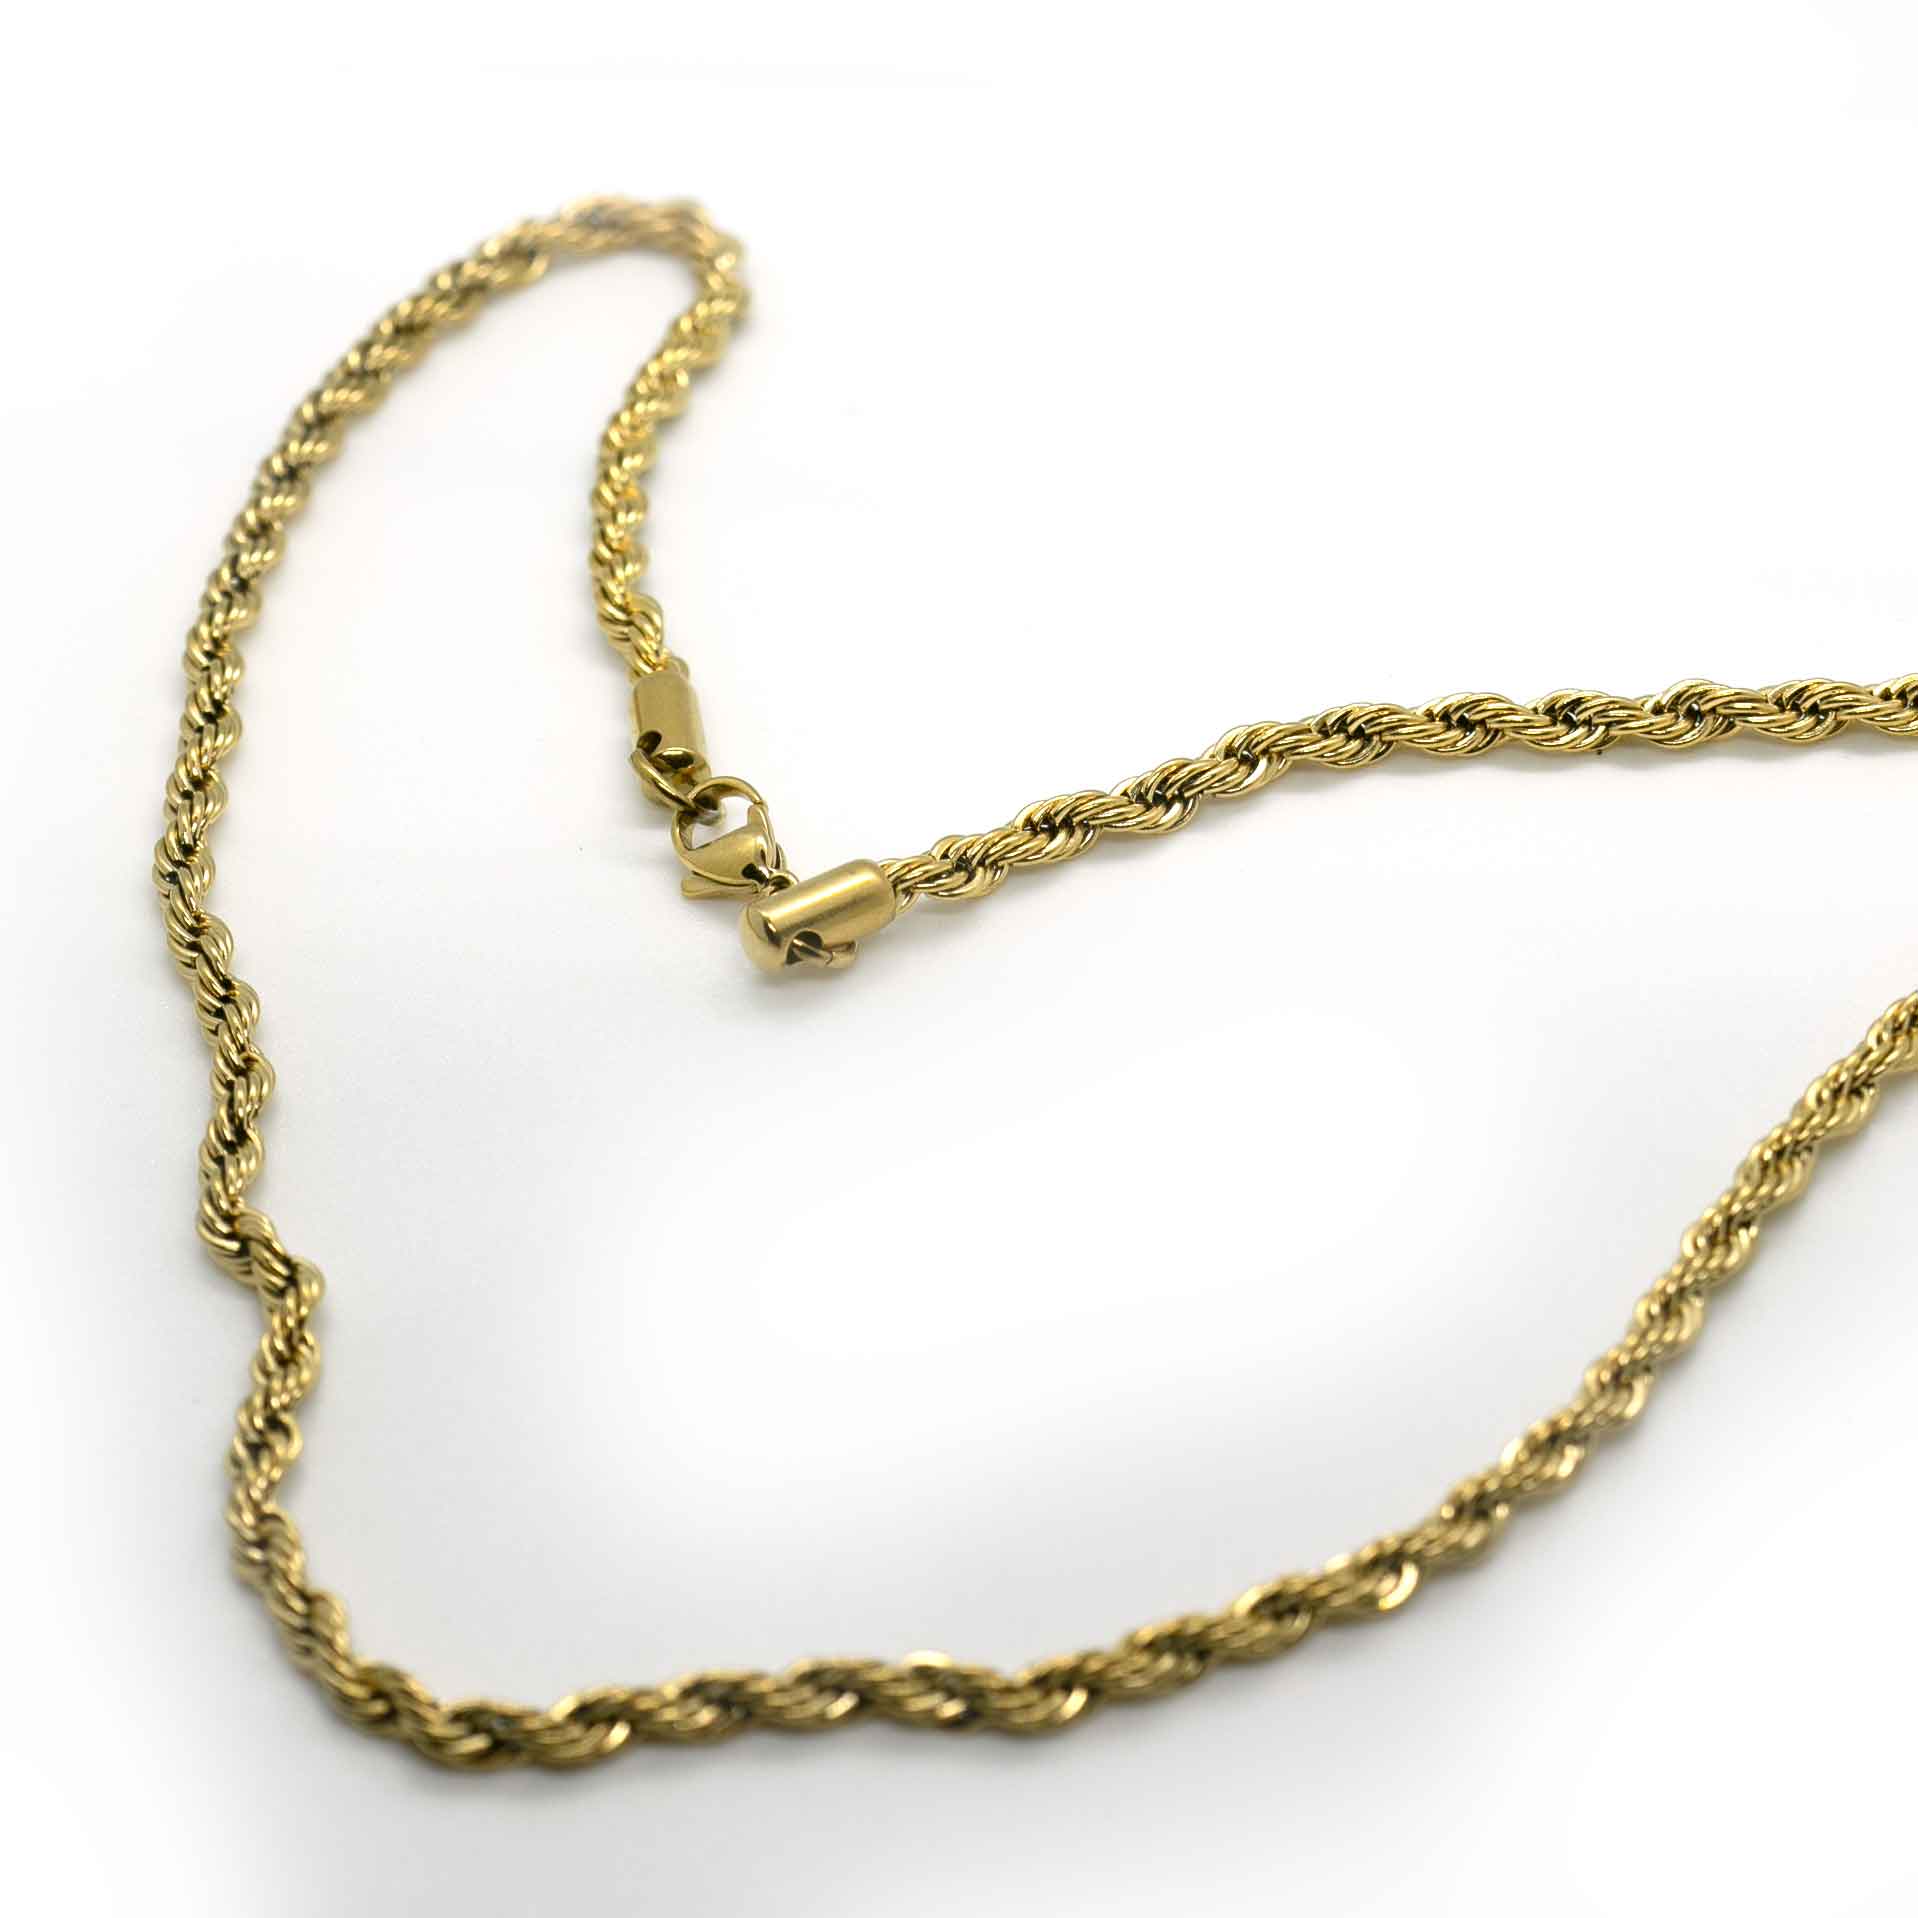 L’Essential Twisted Thin Necklace